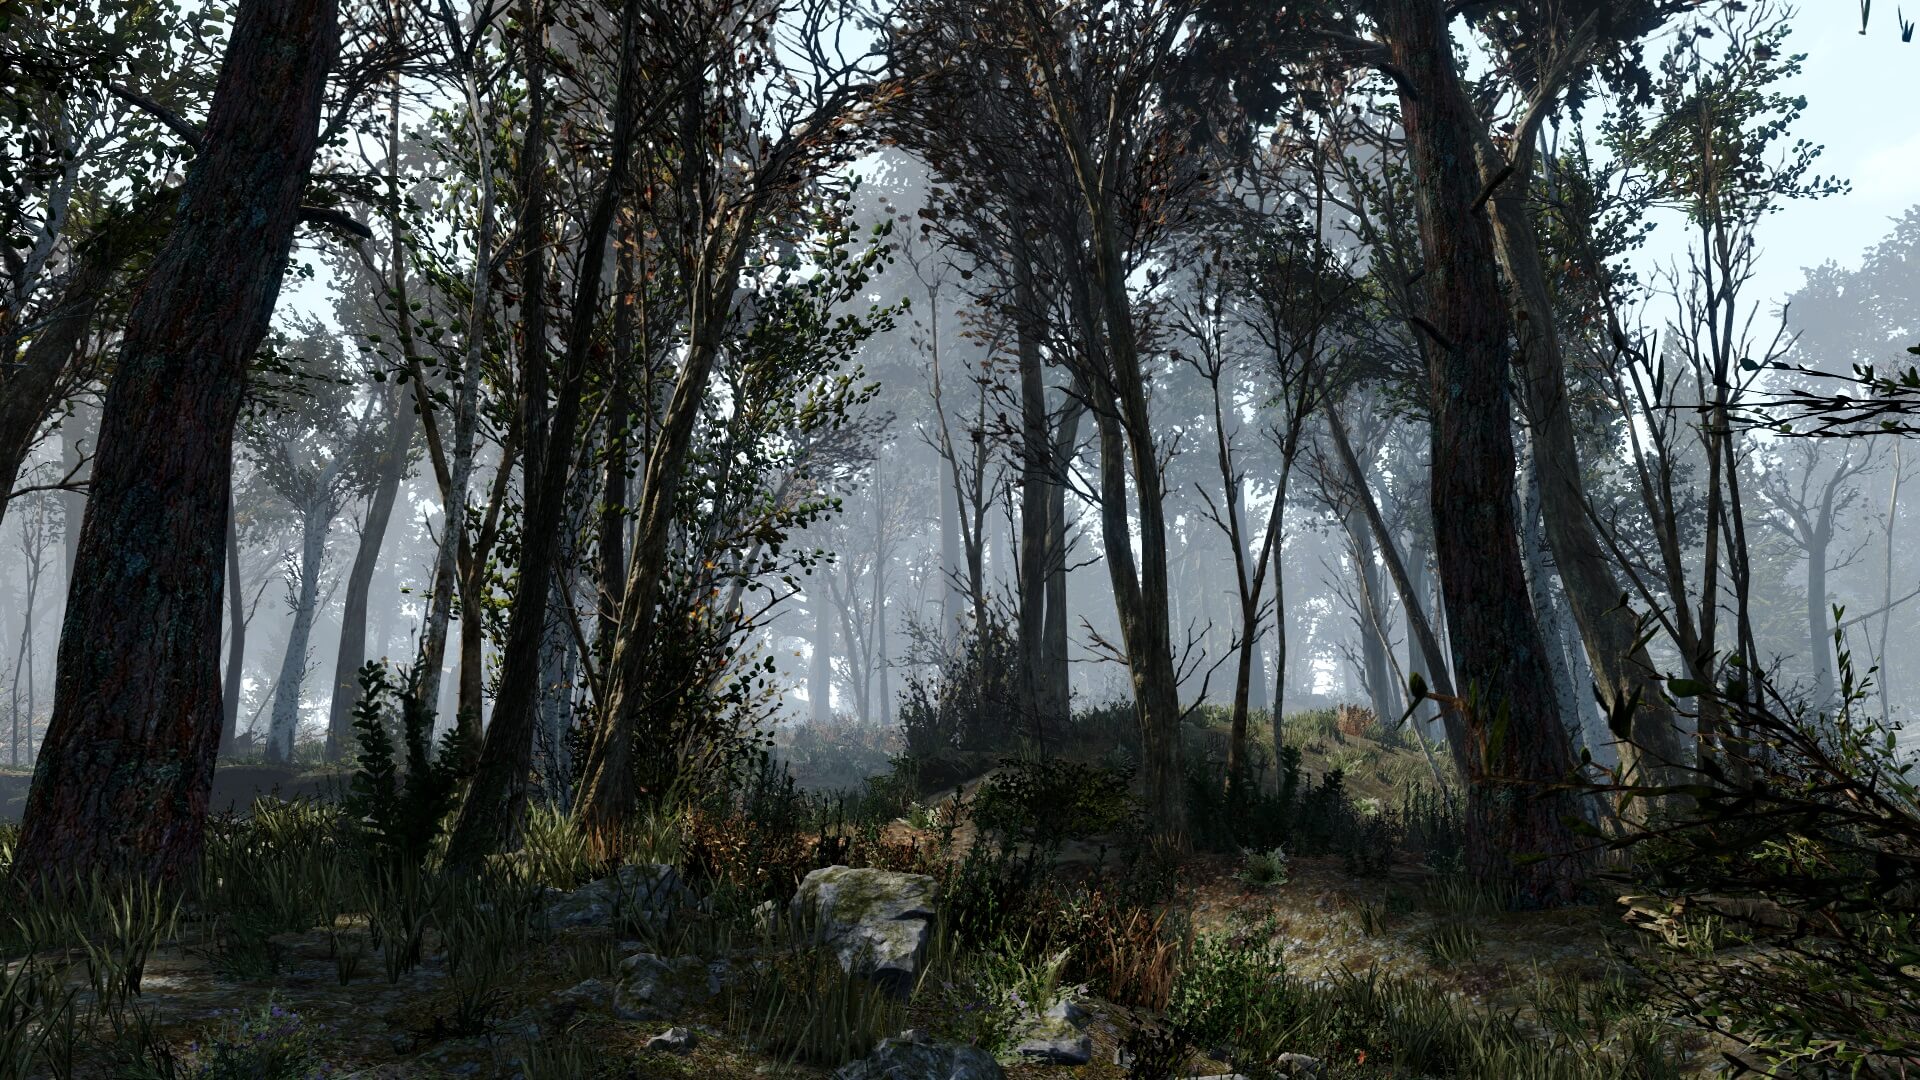 This Fallout 4 adds around 18000 additional trees the